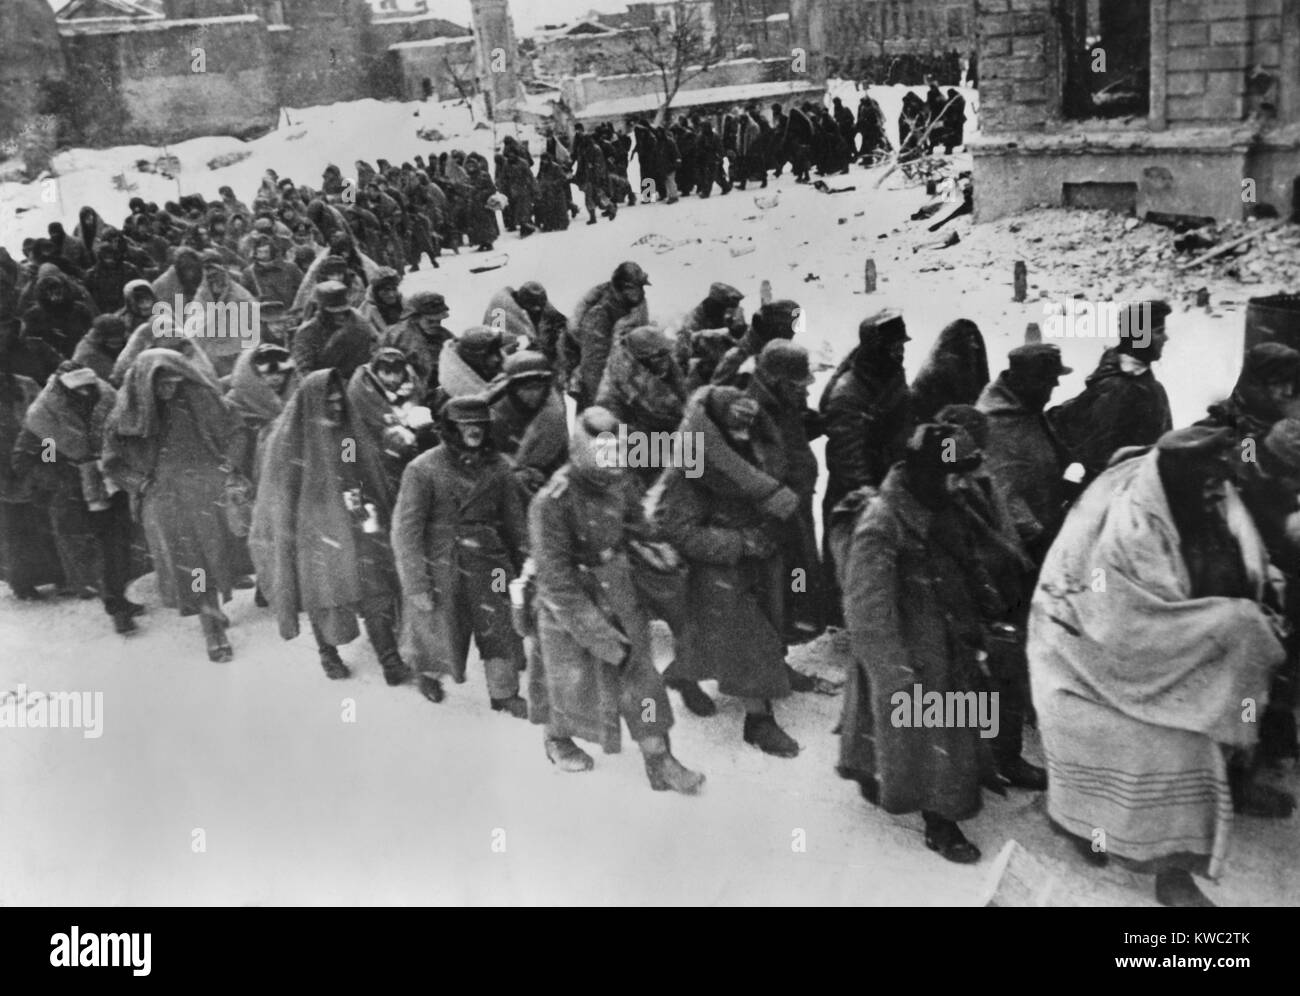 German prisoners march through the snowy streets of battered Stalingrad in Jan.-Feb. 1943. Wrapped in blankets or anything else to protect from the winter weather, they are the remnants of the destroyed German 6th Army. Of the 107,800 soldiers taken prisoner, only 6000 were known to survive their captivity. World War 2 (BSLOC 2015 13 111) Stock Photo